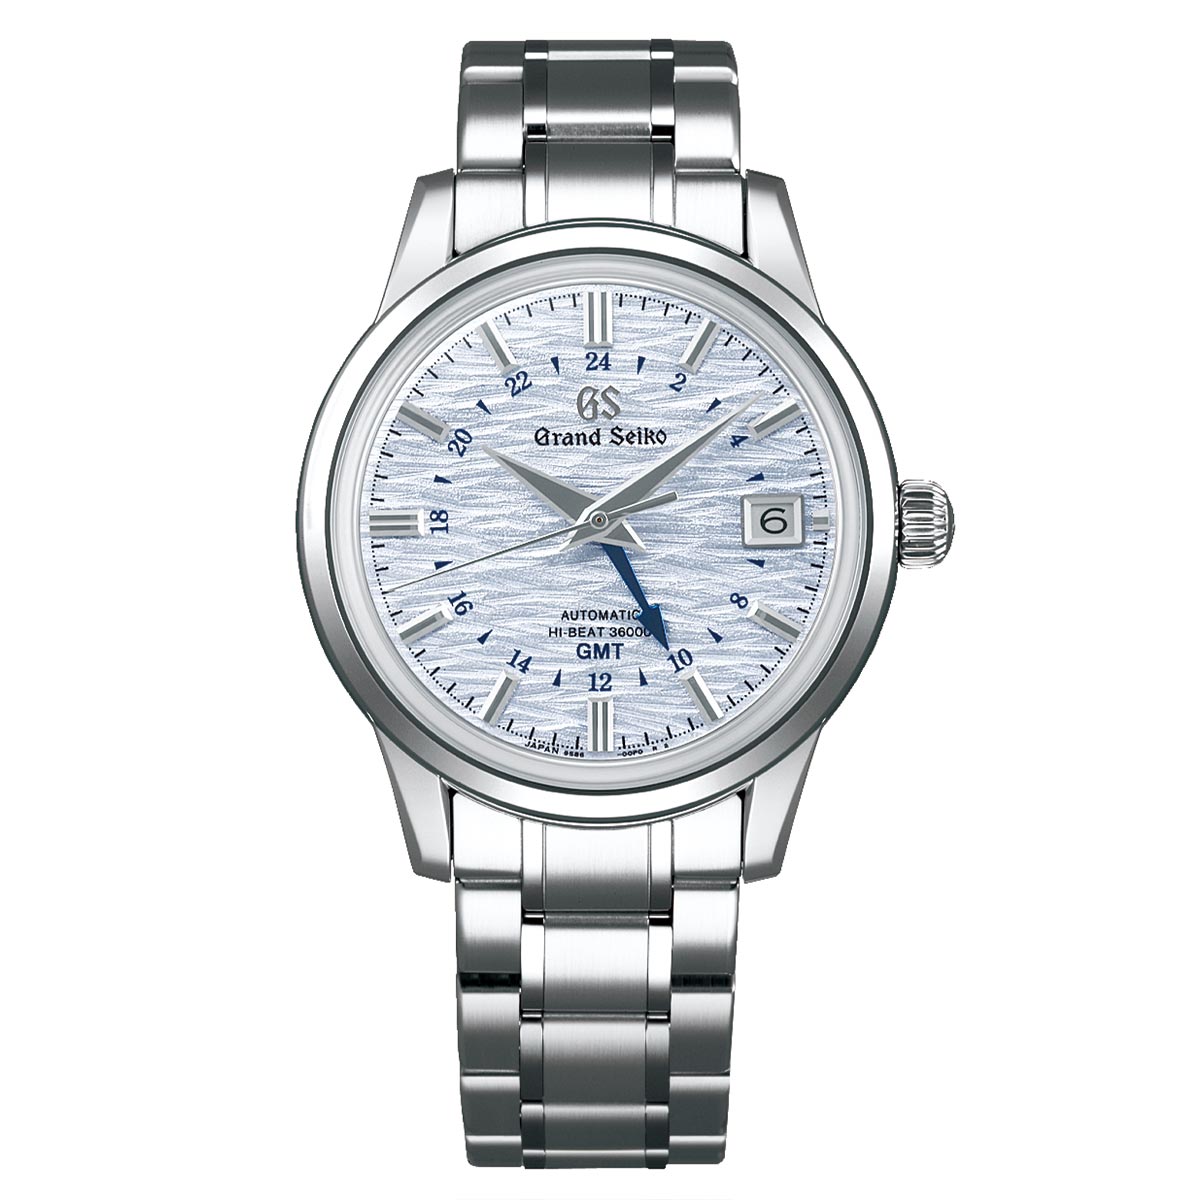 Grand Seiko Elegance Collection Automatic with Manual Winding GMT 39.5mm Watch